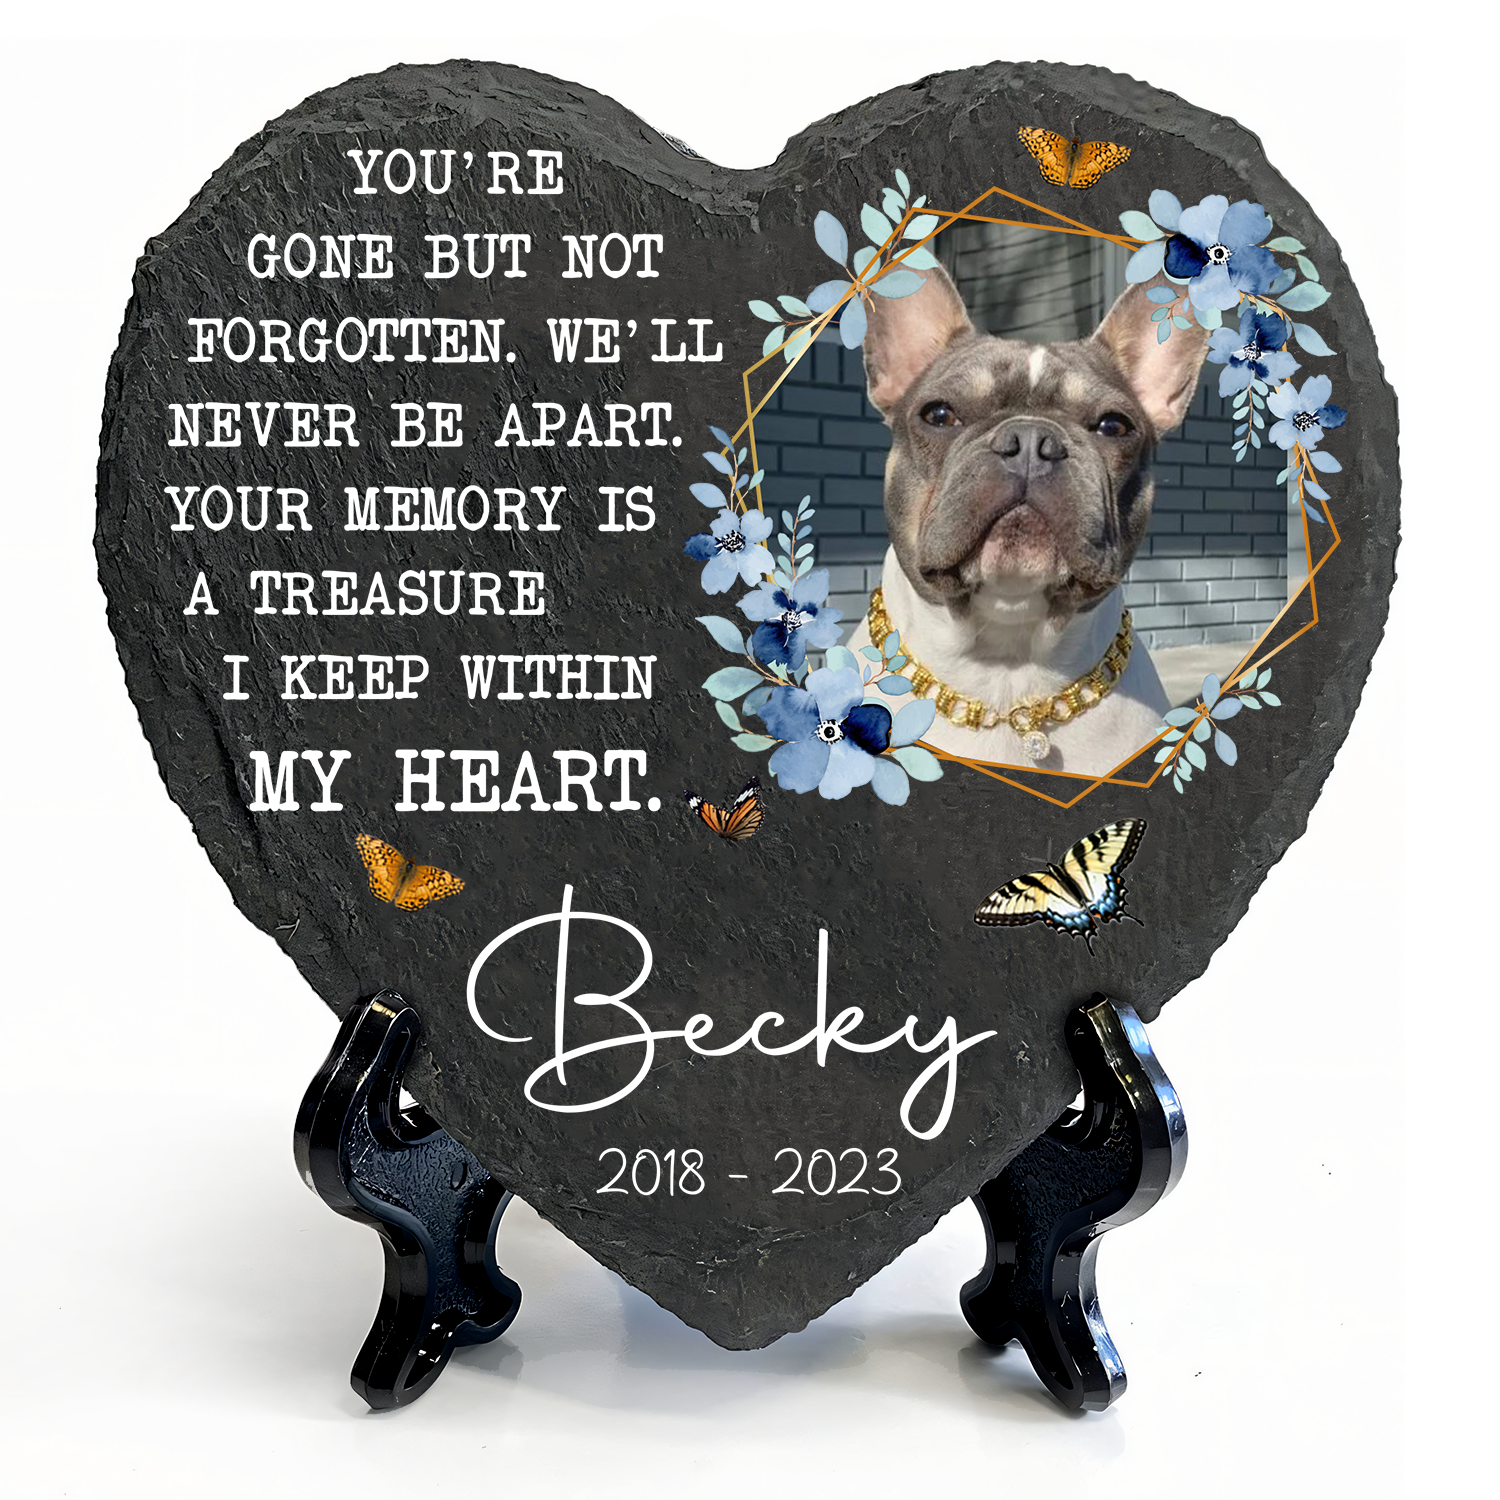 Blue Floral Butterfly Dog Photo You Are Gone But Not Forgotten Custom Dog Memorial Stone, Pet Memorial Gifts - Personalized Custom Memorial Tombstone